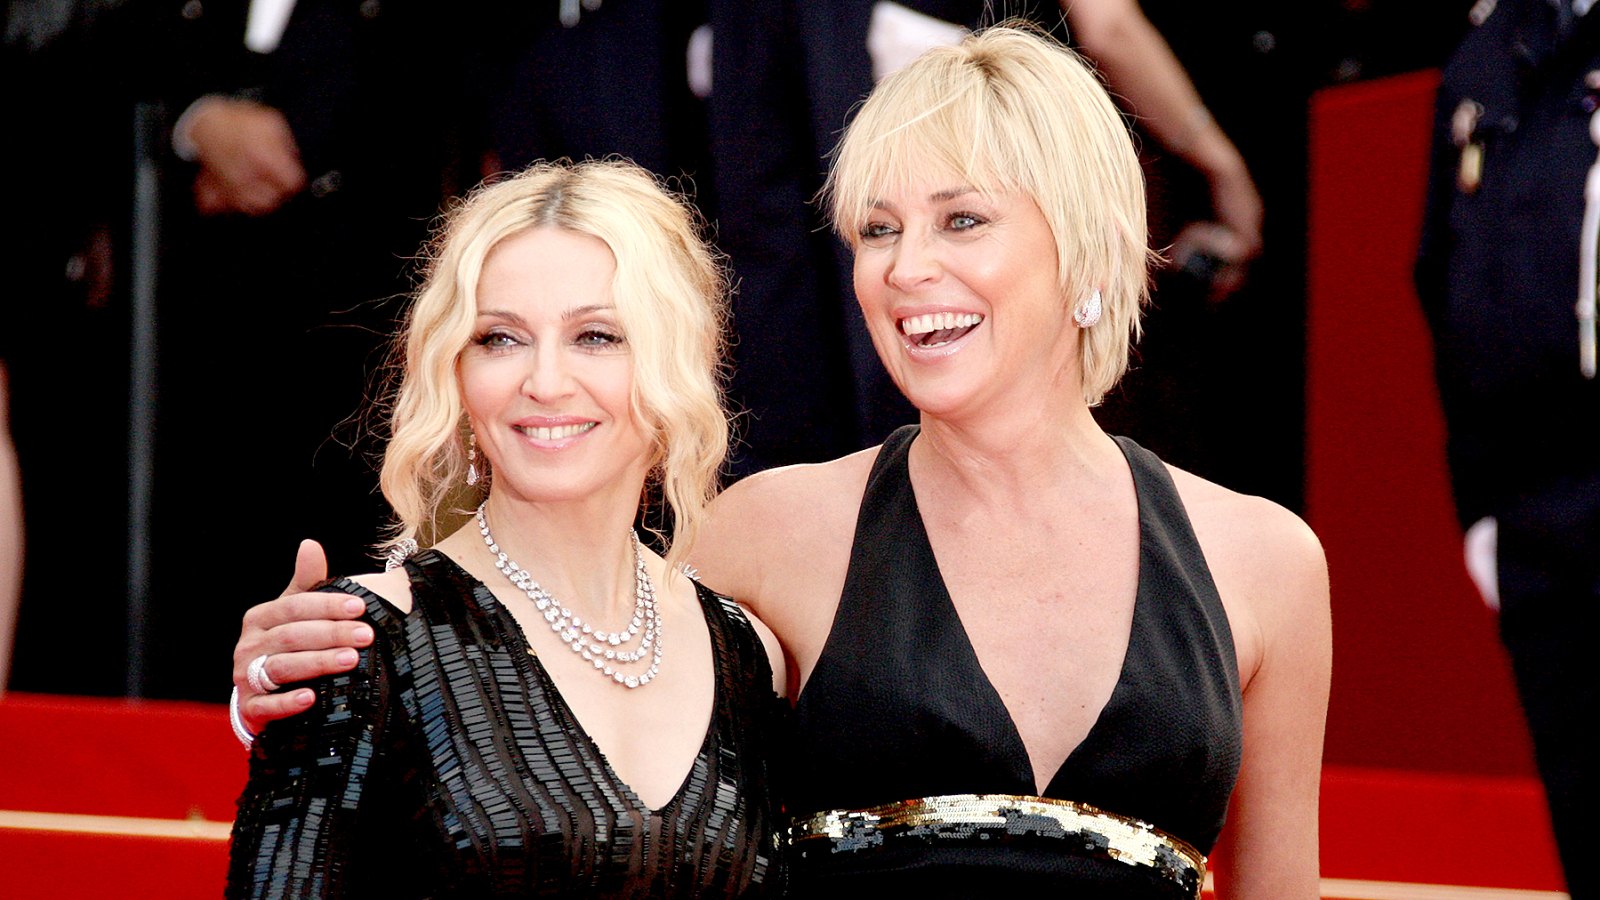 Madonna and Sharon Stone attend the "I Am Because We Are" premiere at the Palais des Festivals during the 61st International Cannes Film Festival on May 21, 2008 in Cannes, France.